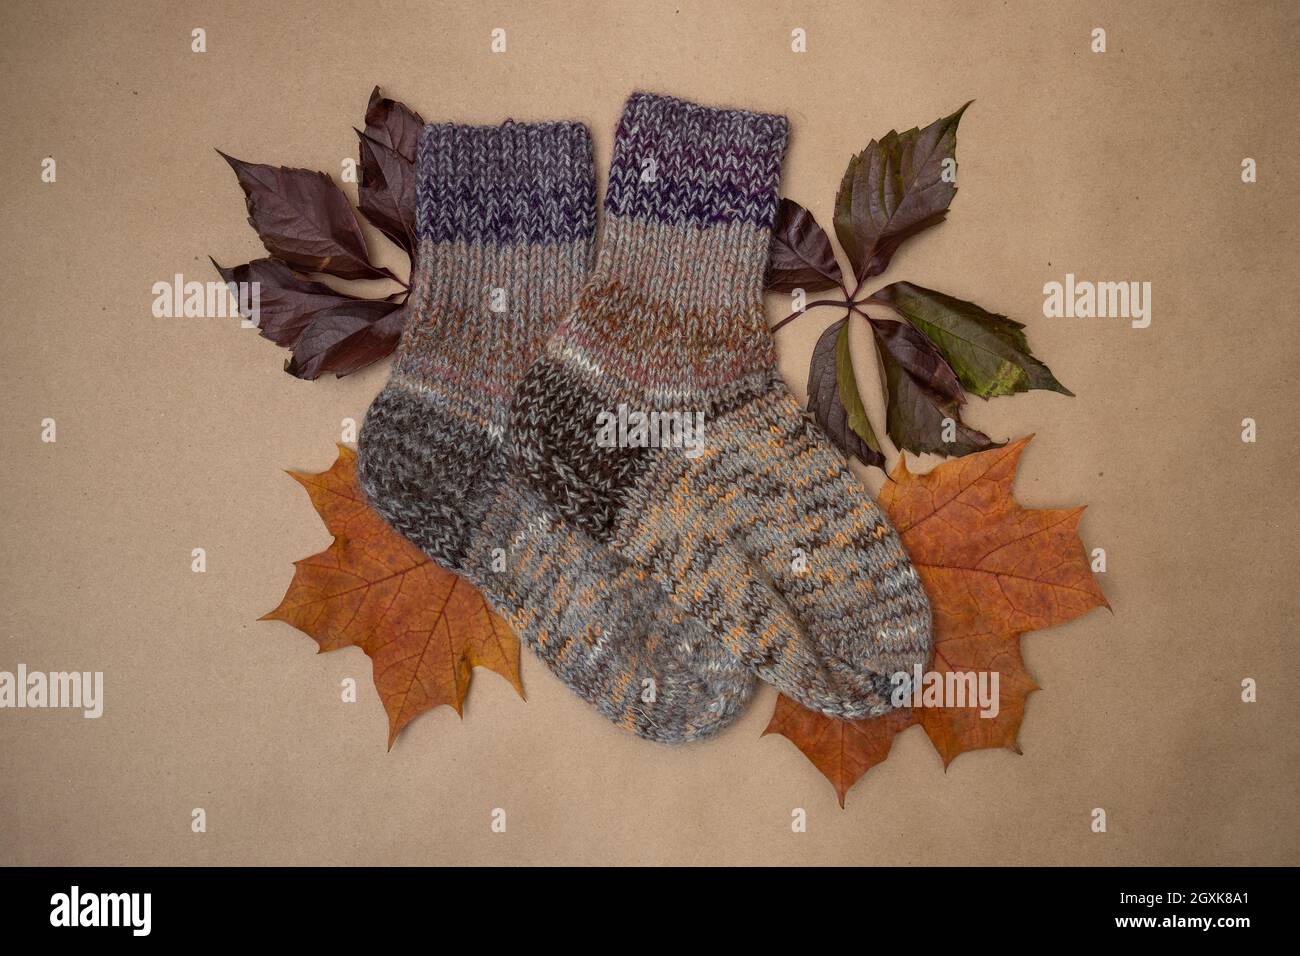 Concept - autumn is the time to warm up and do needlework.Hand-knitted socks in autumn colors and autumn foliage lie on a sheet of craft paper. Stock Photo